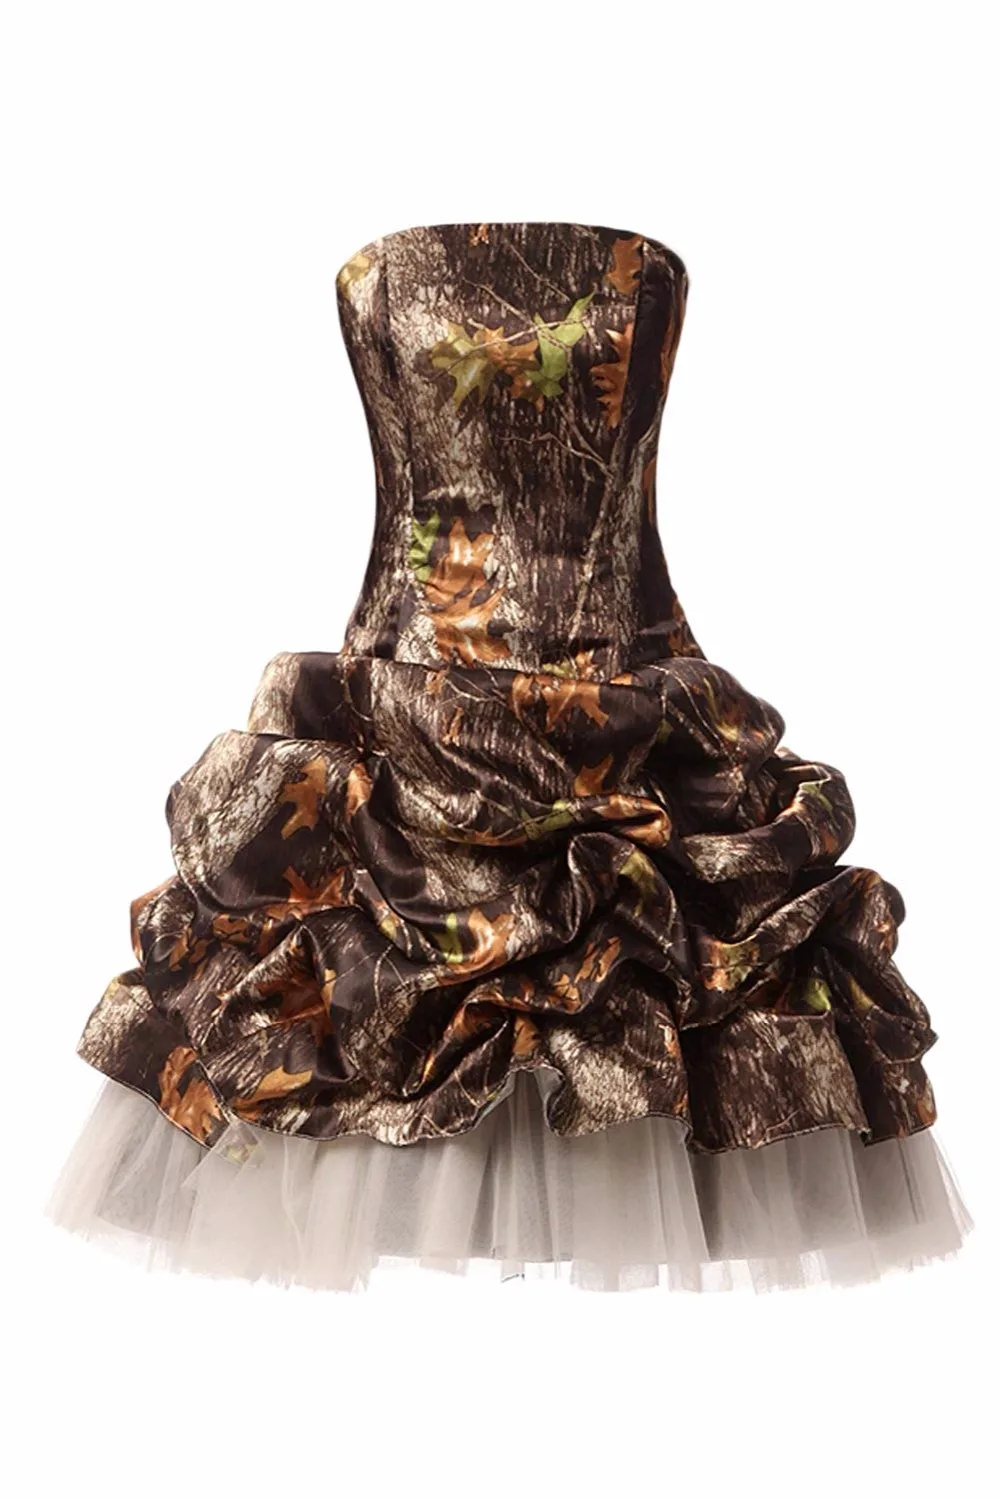 Bealegantom 2019 New High Quality Short Satin Camo Prom Dresses Camouflage Evening Homecoming Party Gown QA1570